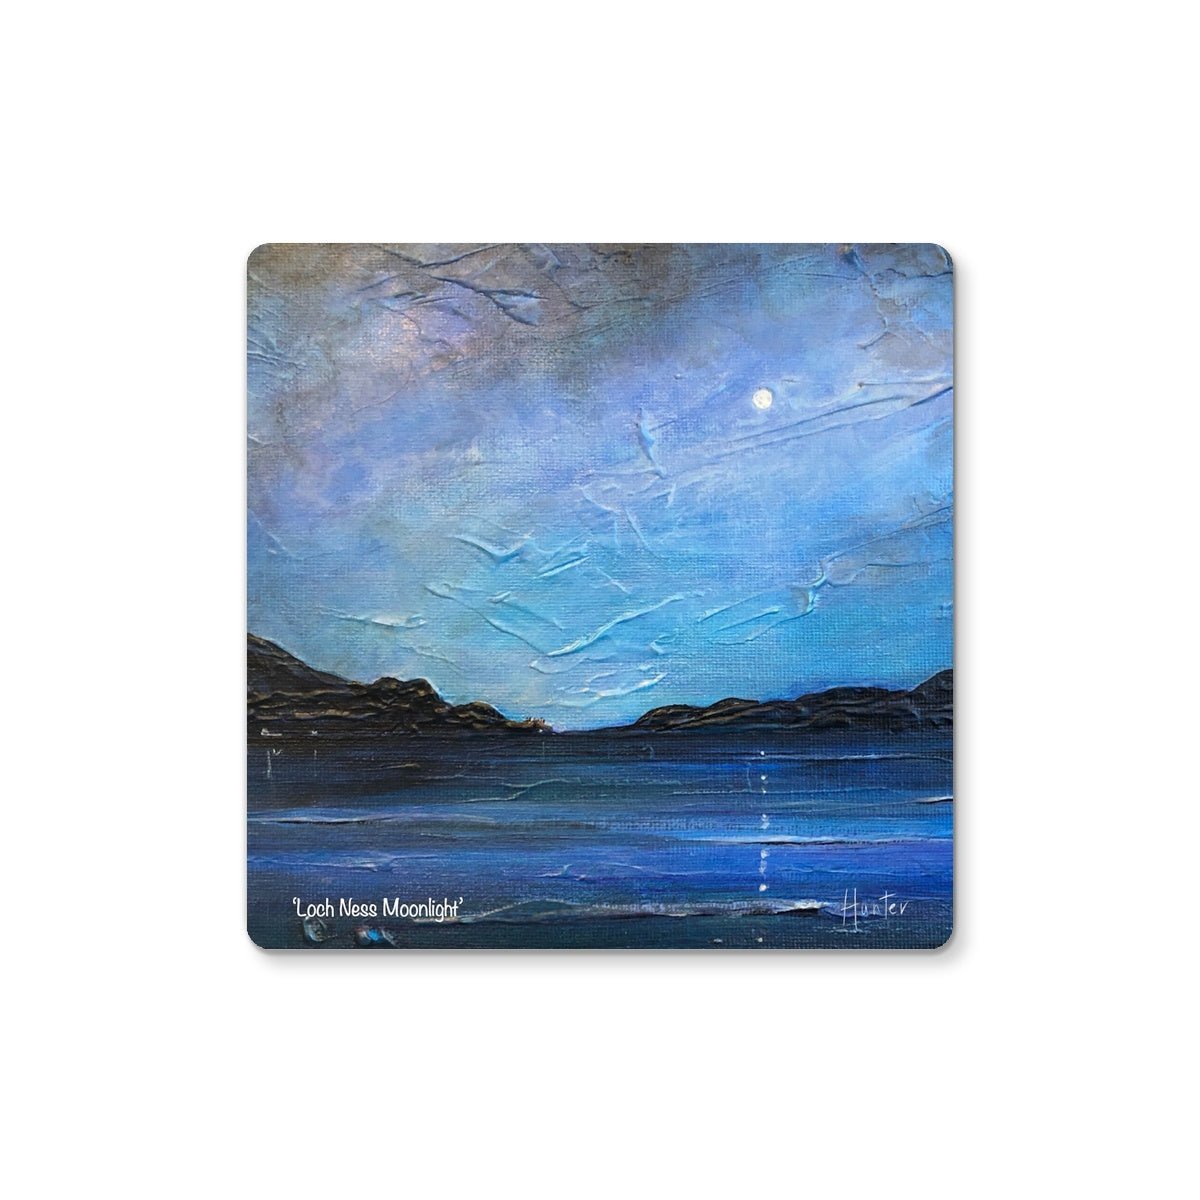 Loch Ness Moonlight Art Gifts Coaster-Coasters-Scottish Lochs & Mountains Art Gallery-Single Coaster-Paintings, Prints, Homeware, Art Gifts From Scotland By Scottish Artist Kevin Hunter